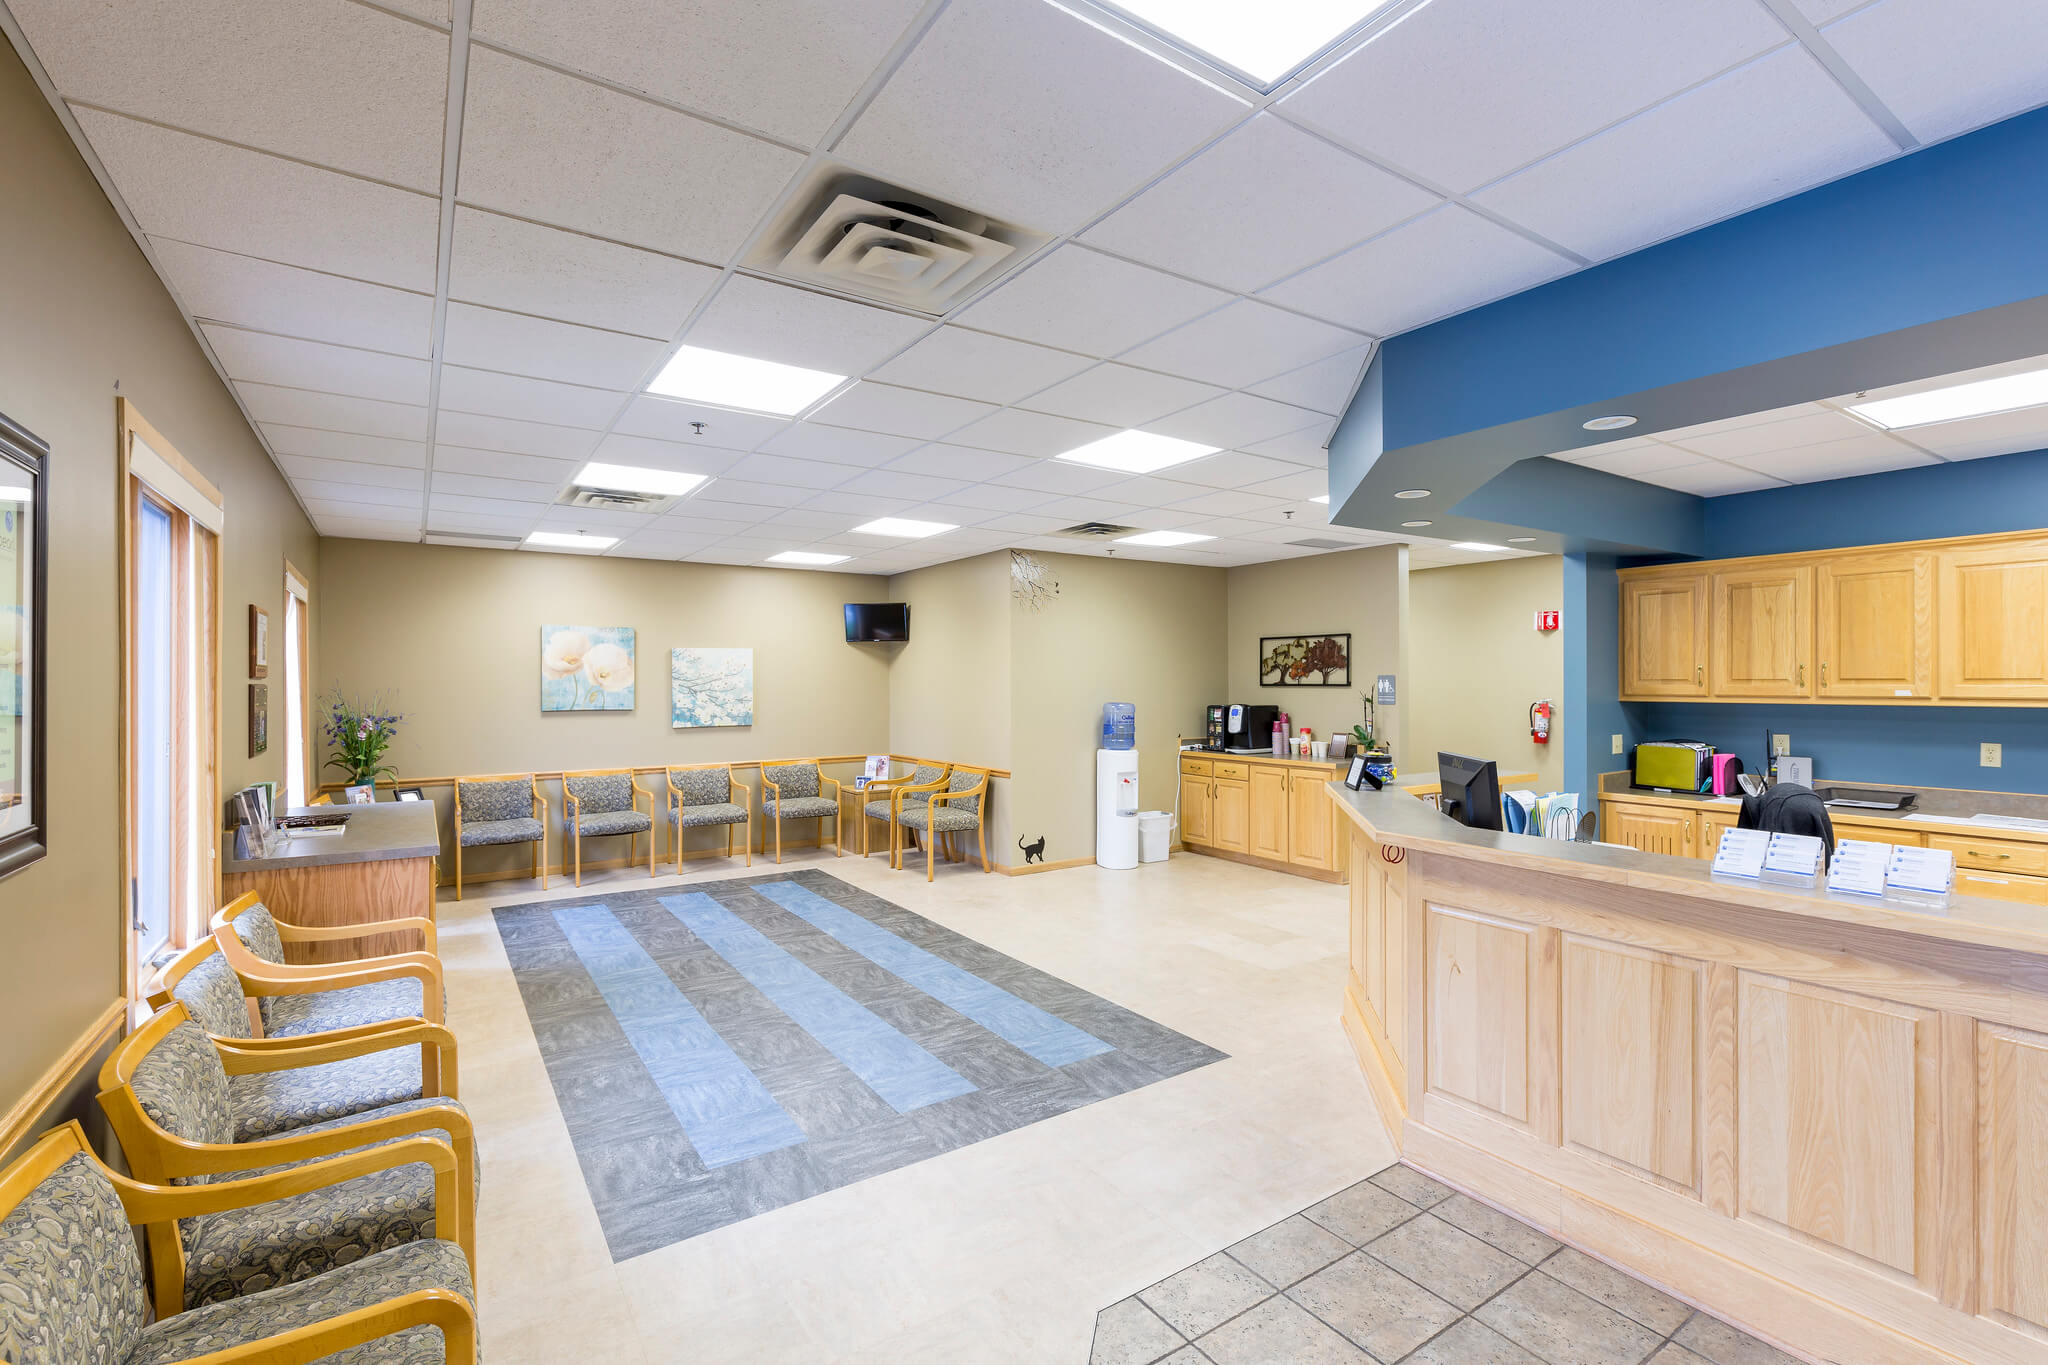 A view of the reception area at the BluePearl Pet Hospital in Blaine.